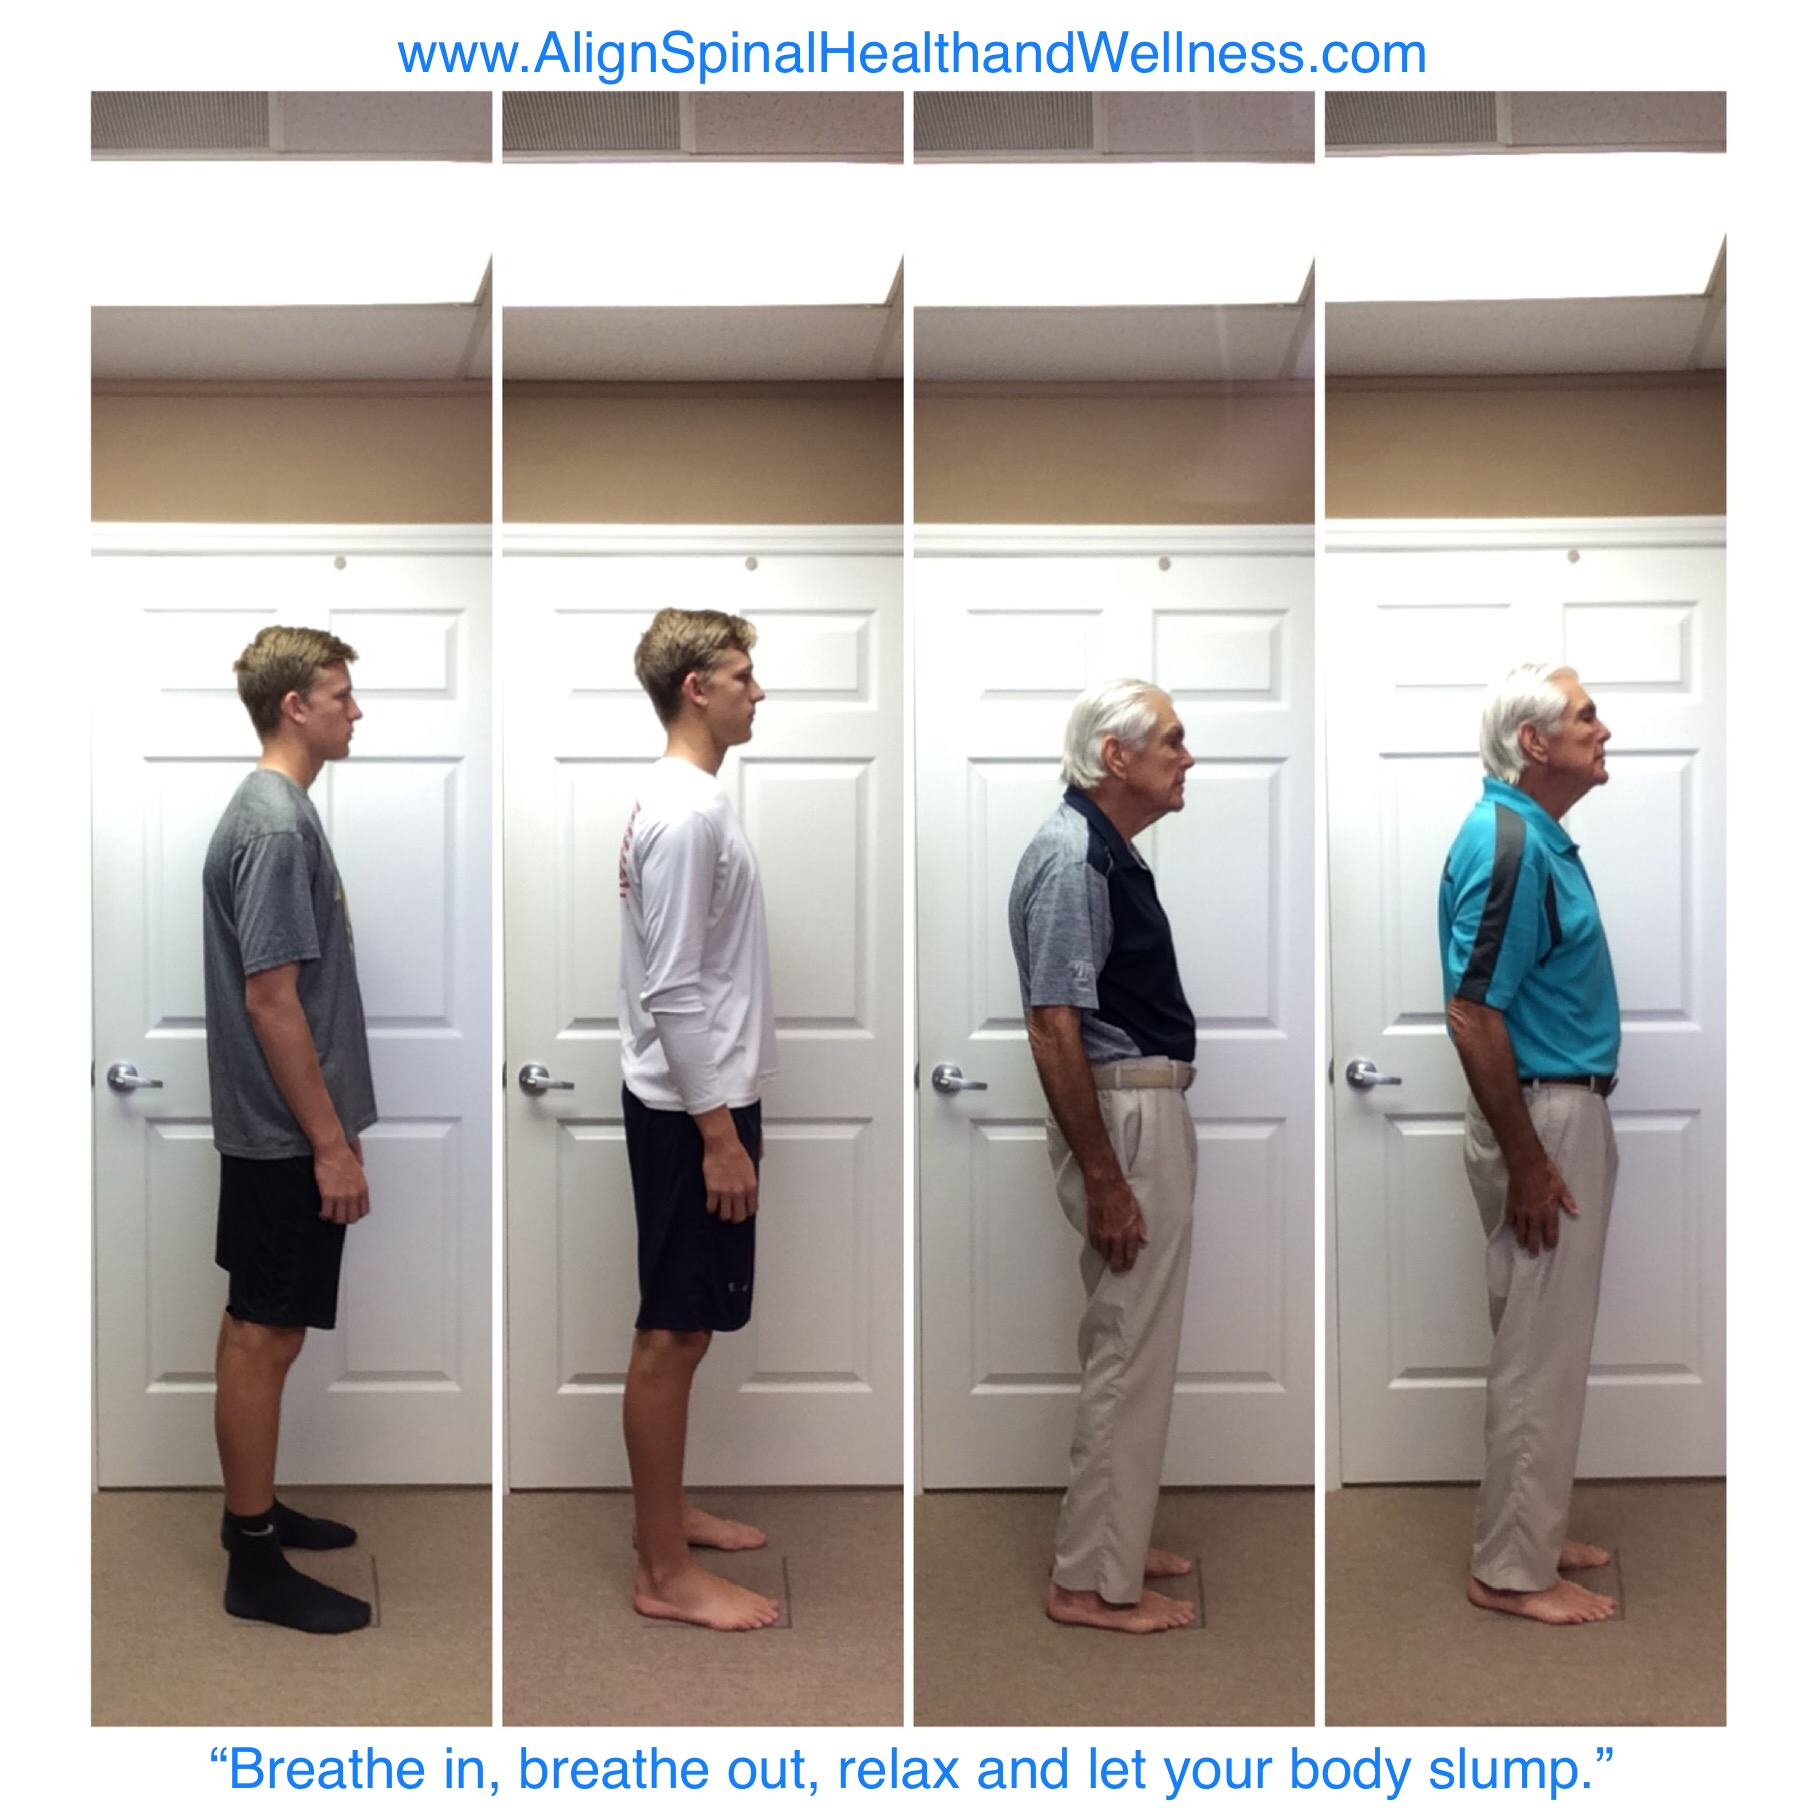 Align Spinal Health and Wellness